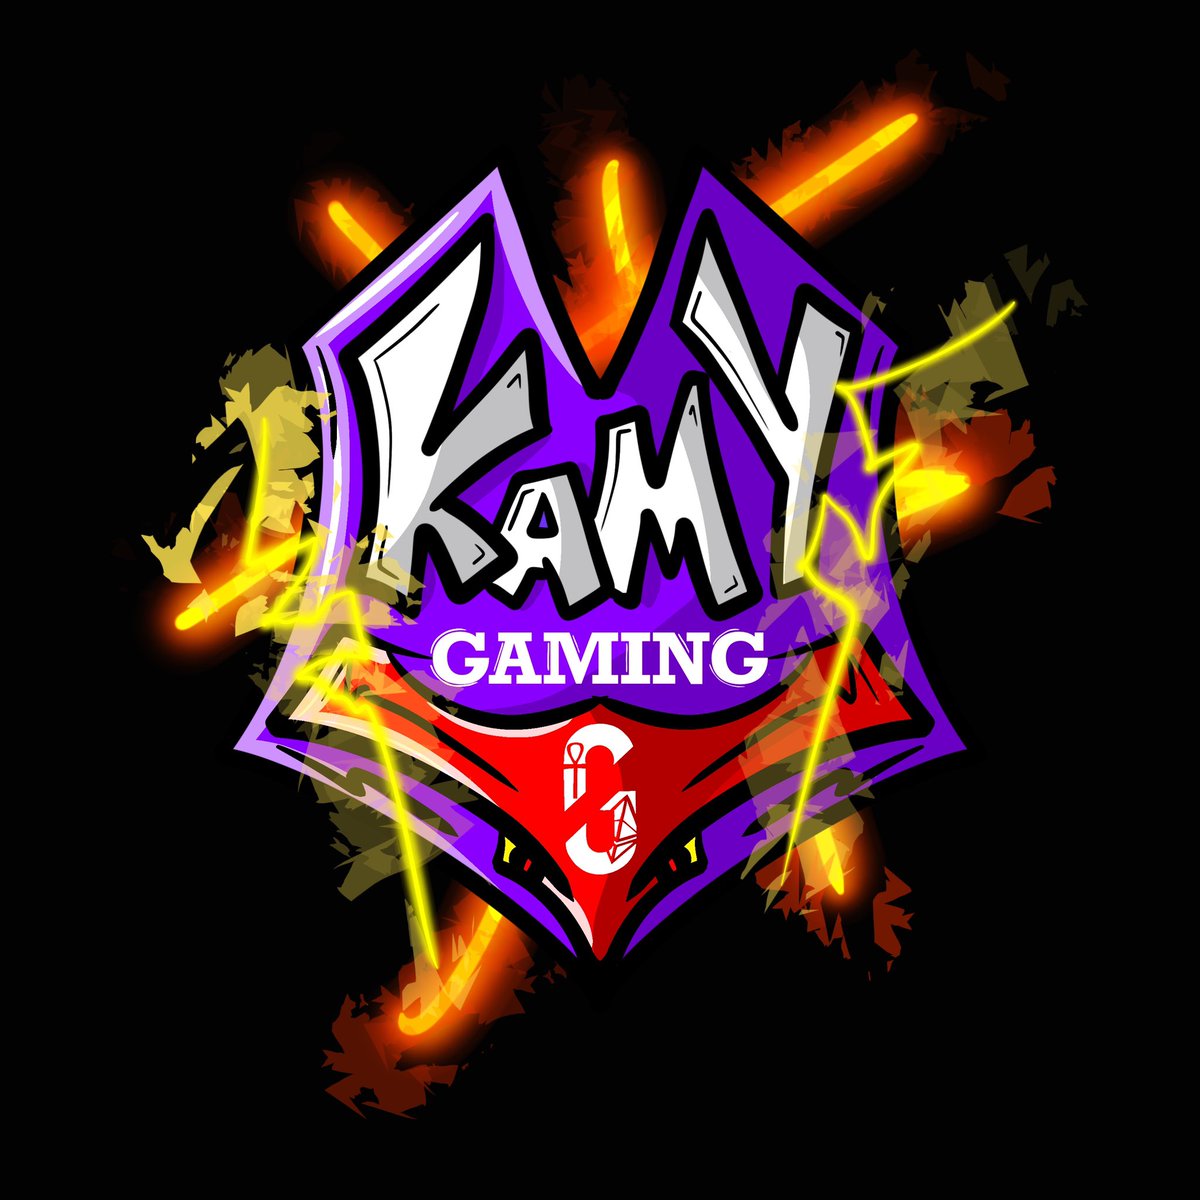 Watching live streaming in youtube with #kamyGaming 
Come and join here, let's watch together😍: youtube.com/live/PX91rGG3C…
#GALs 
#kamyGaming
@glamapeladies 
@KeniaRutishaus1 
Let's goooooo